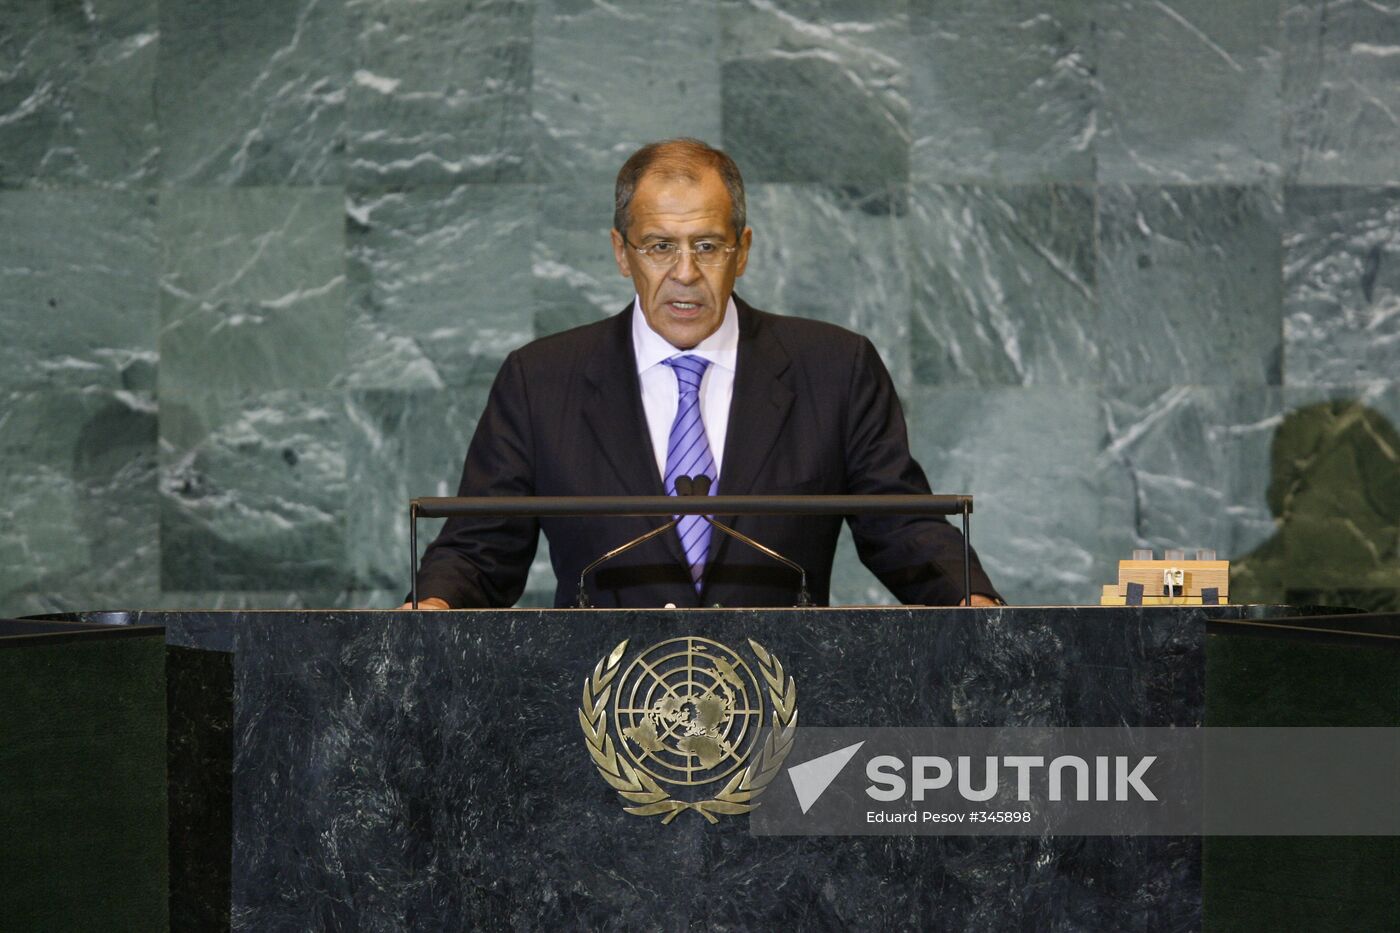 Russian Foreign Minister Sergey Lavrov at UN General Assembly